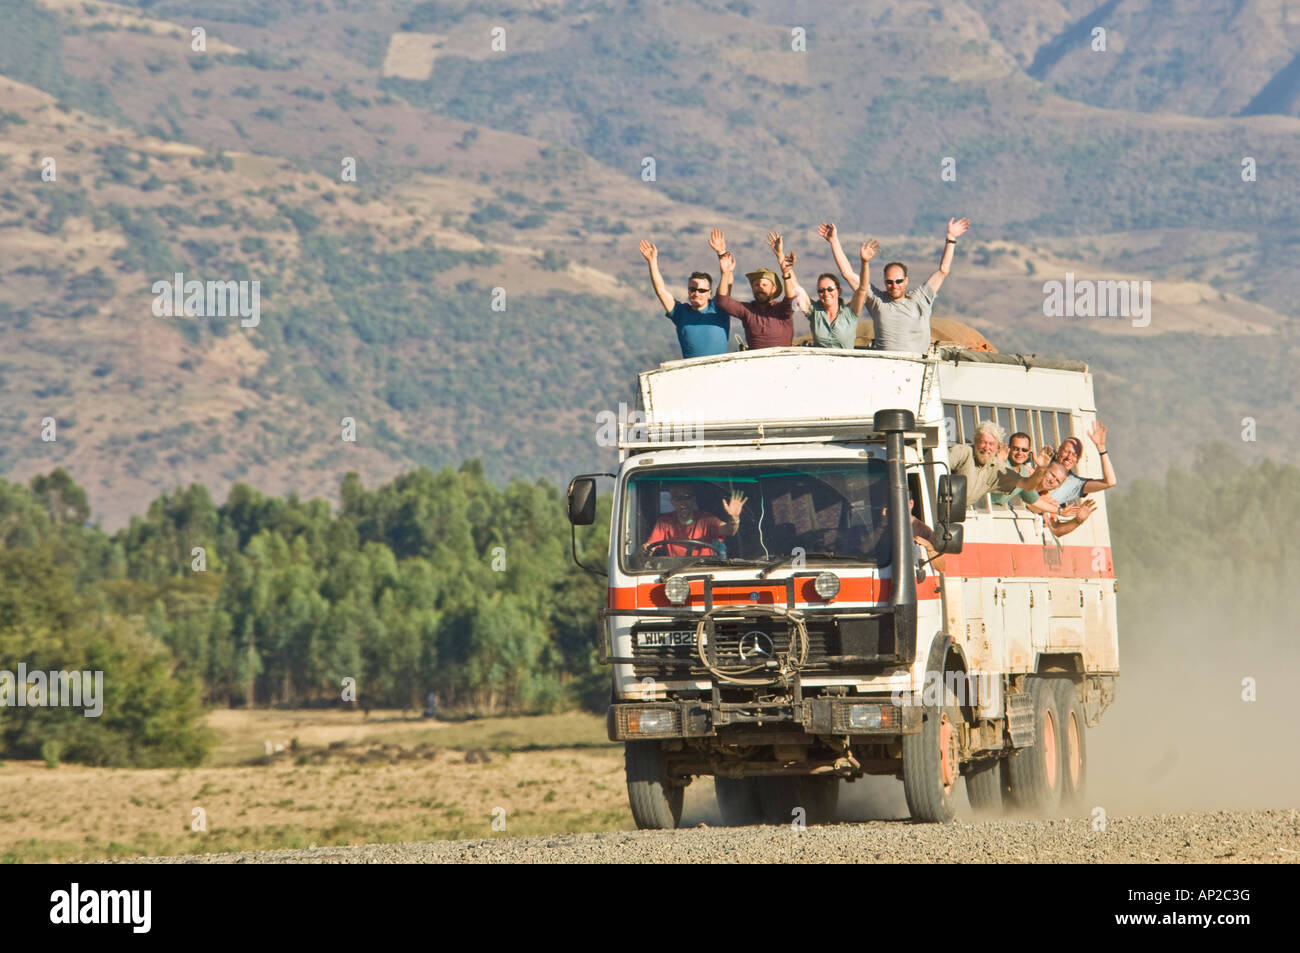 An overland truck at speed on a dirt road with the passengers waving from the roof seats and windows of the truck. Stock Photo